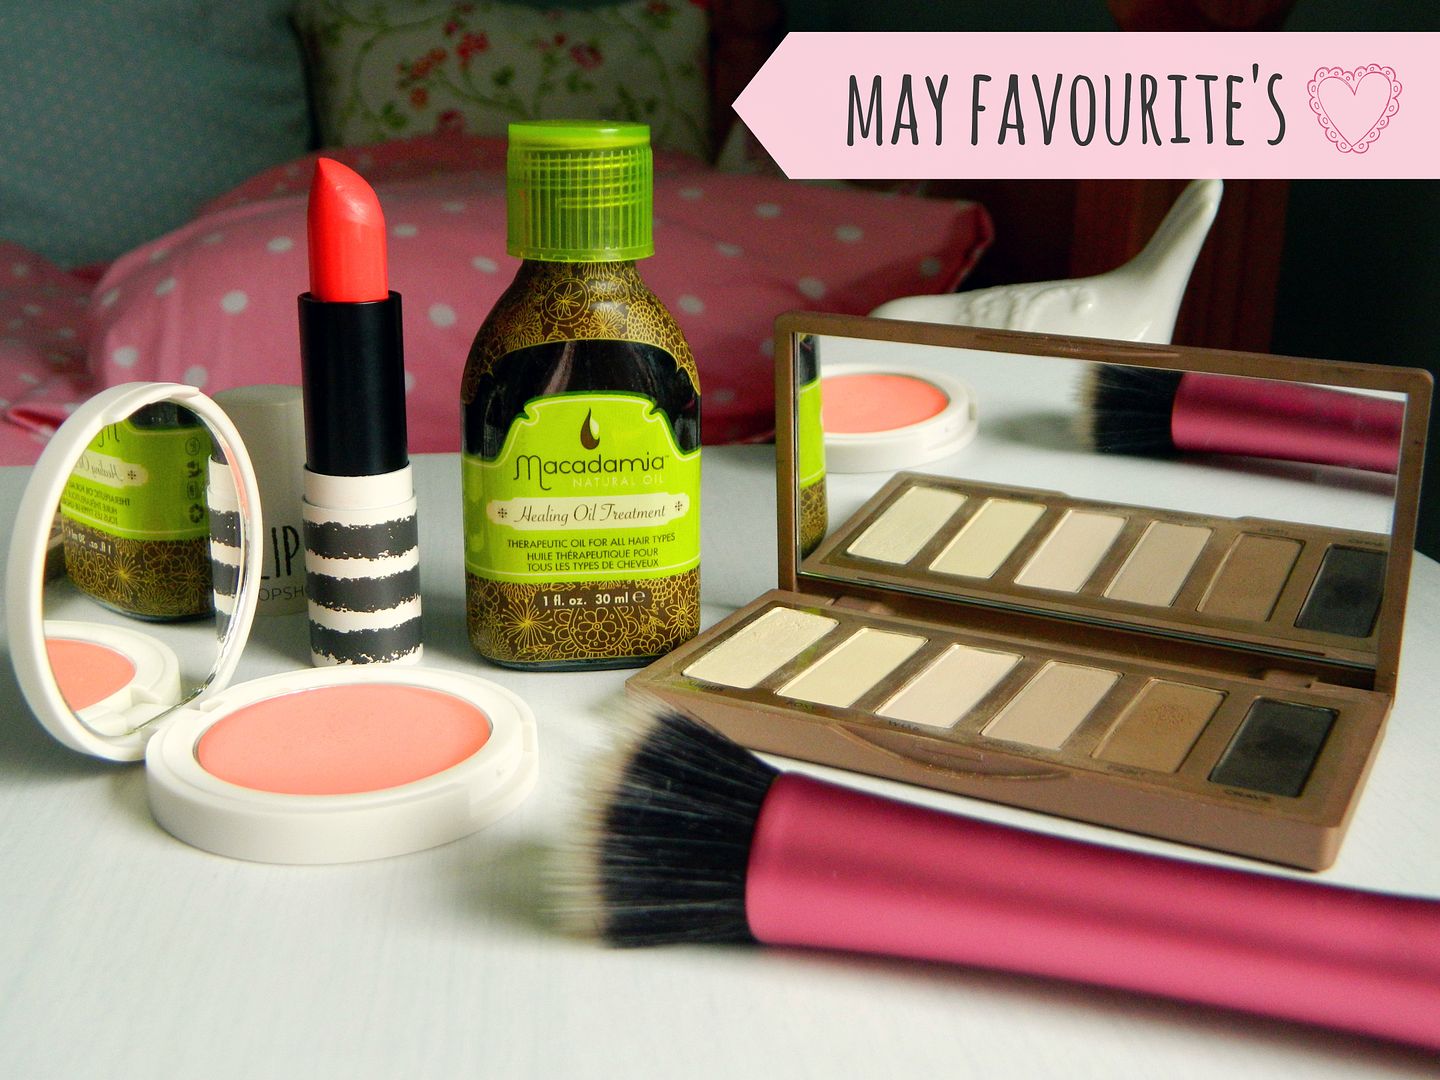 May Favourite's Urban Decay Naked Baics Real Techniques Stippling Brush Macadamia Healing Oil Topshop Ditsy Lipstick Head Over Heels Blusher Belle-amie